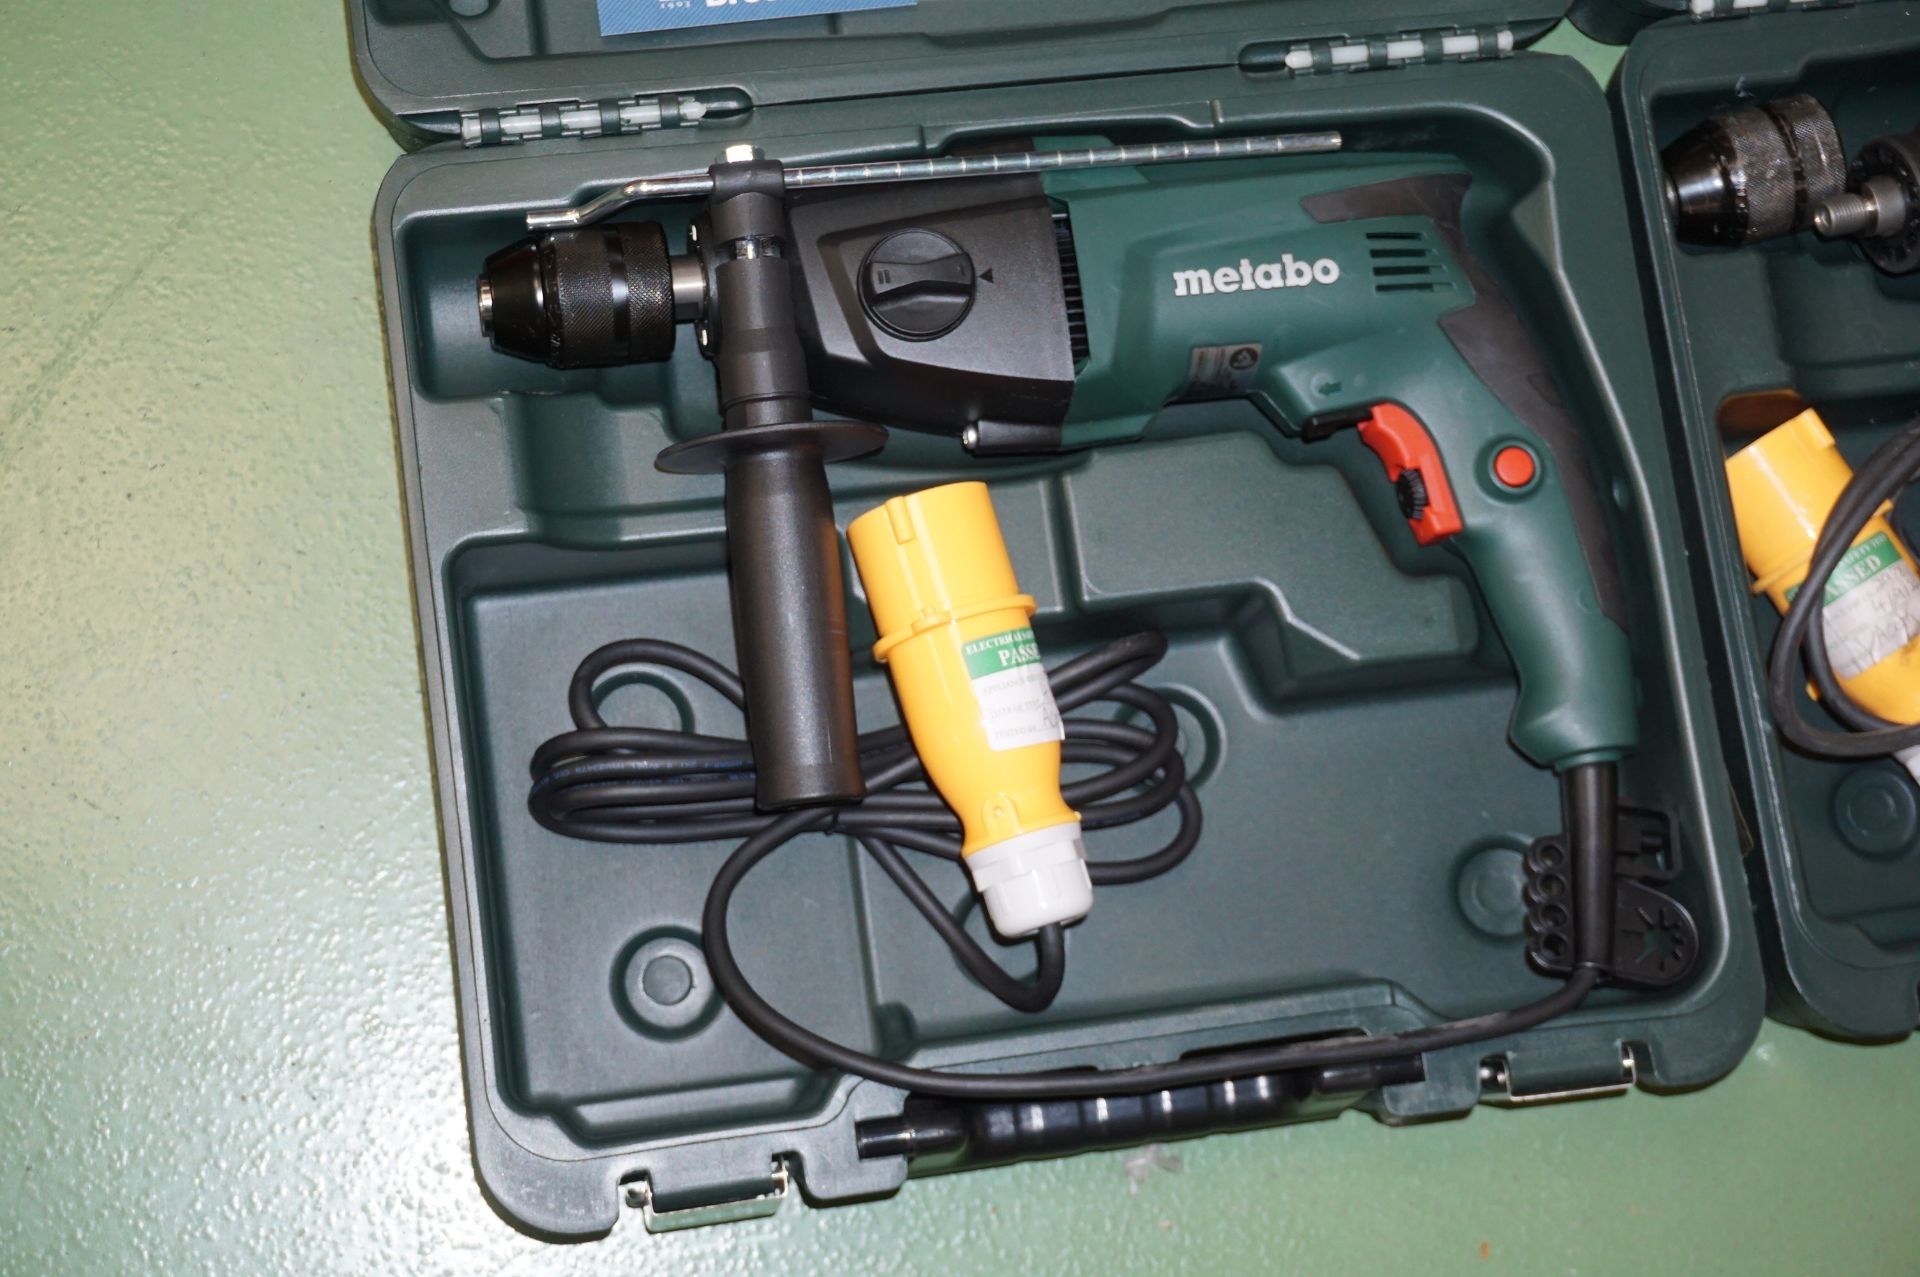 2 x Metabo SBE 760 110v hammer drills with carry cases - Image 2 of 3